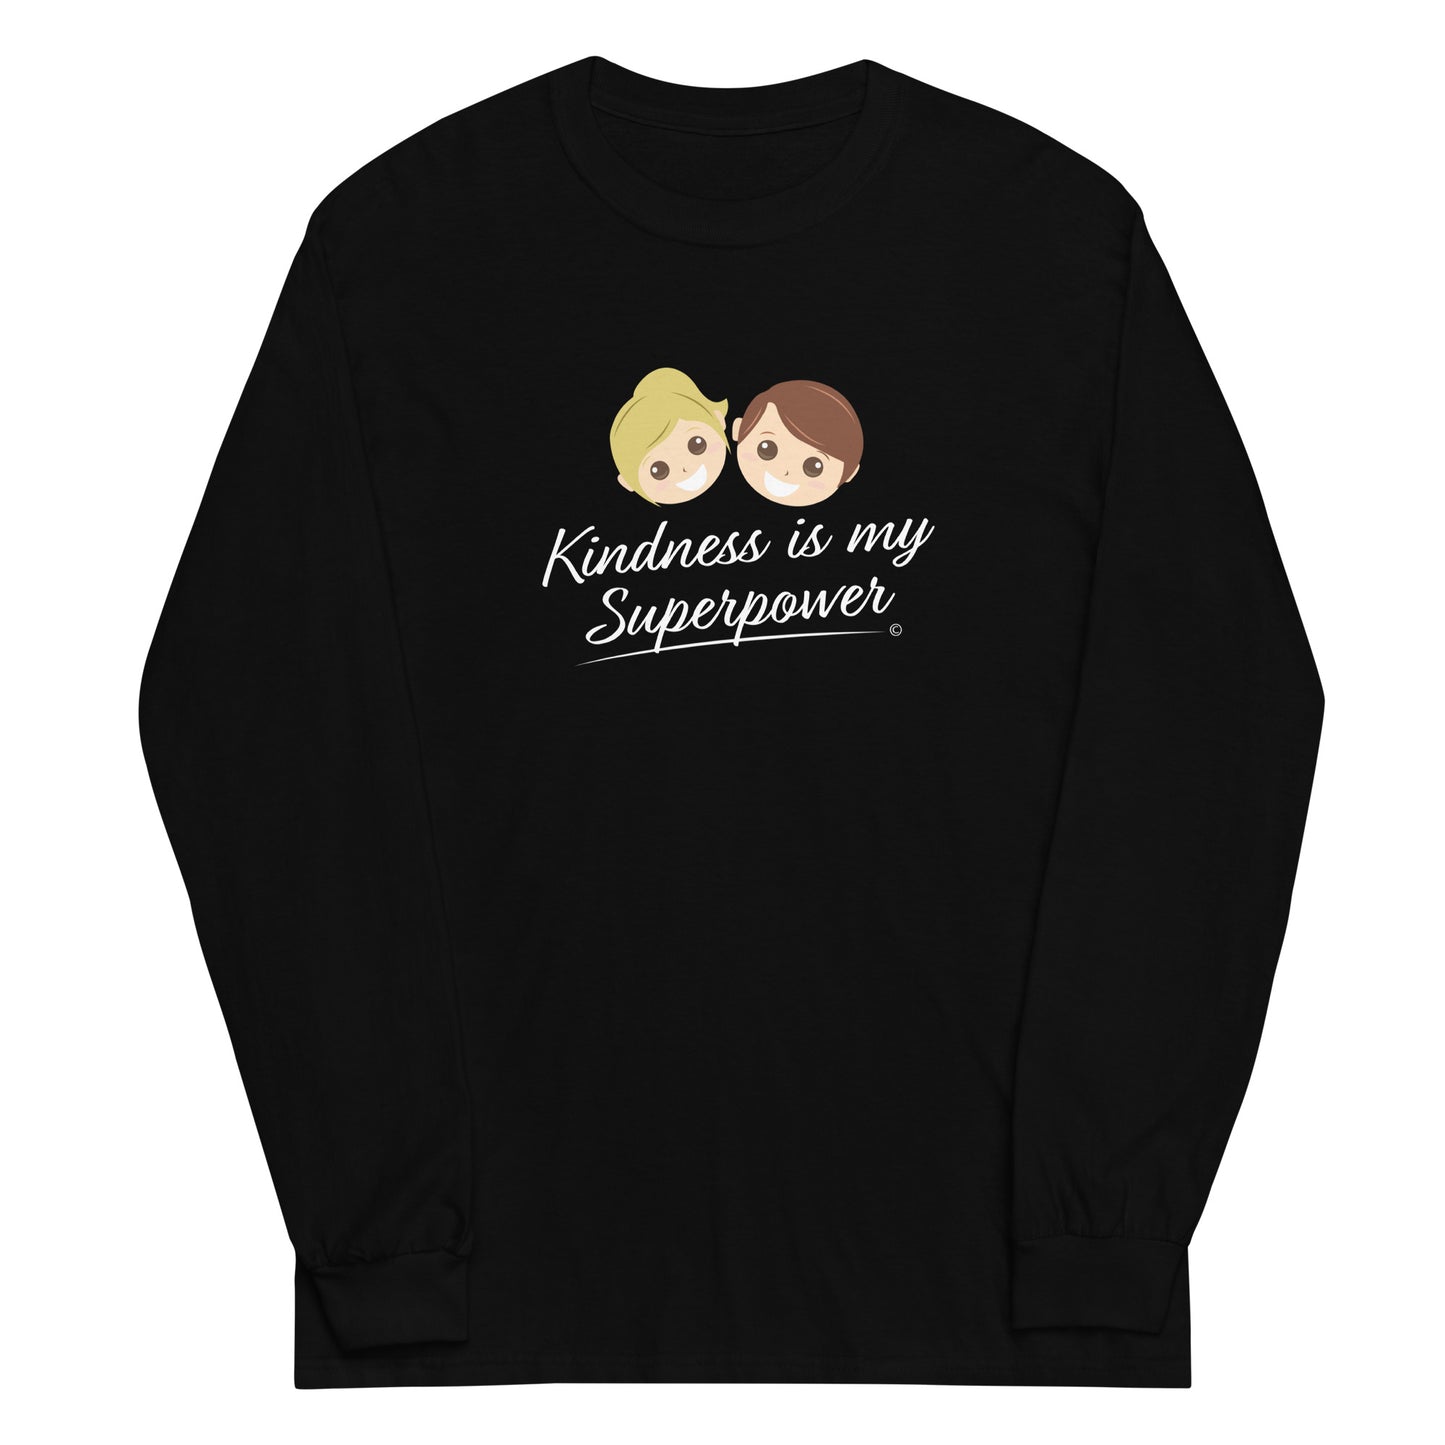 A stylish long sleeve shirt in black featuring the empowering quote 'Kindness is my Superpower' in bold lettering.